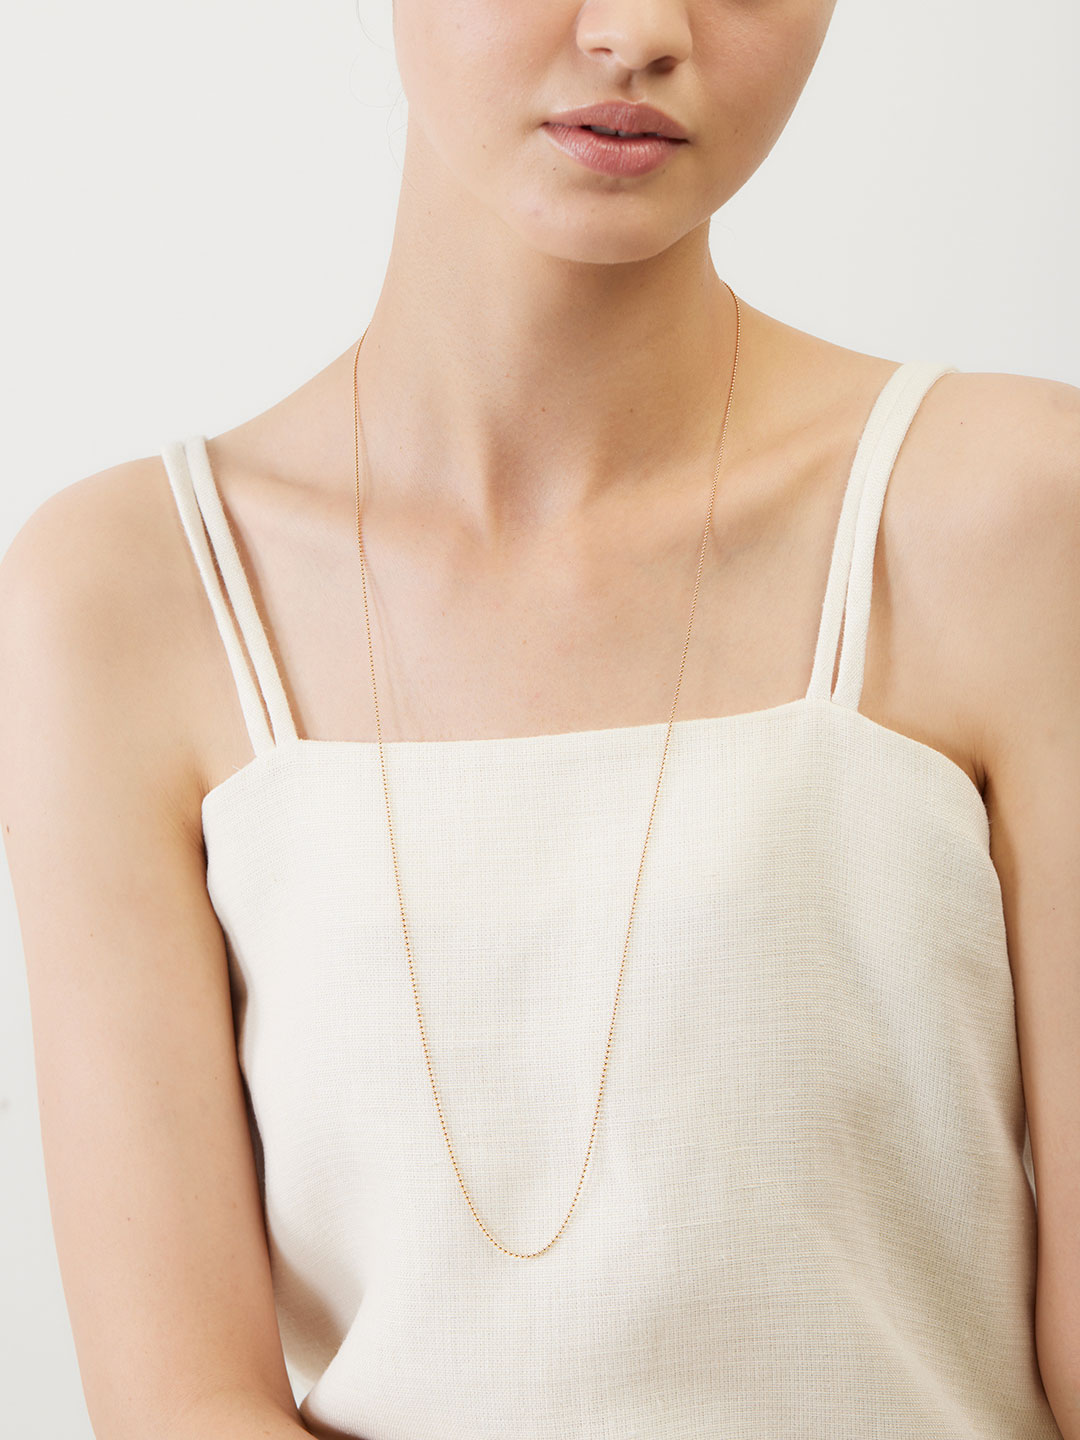 Ball Chain Necklace 80cm - Yellow Gold